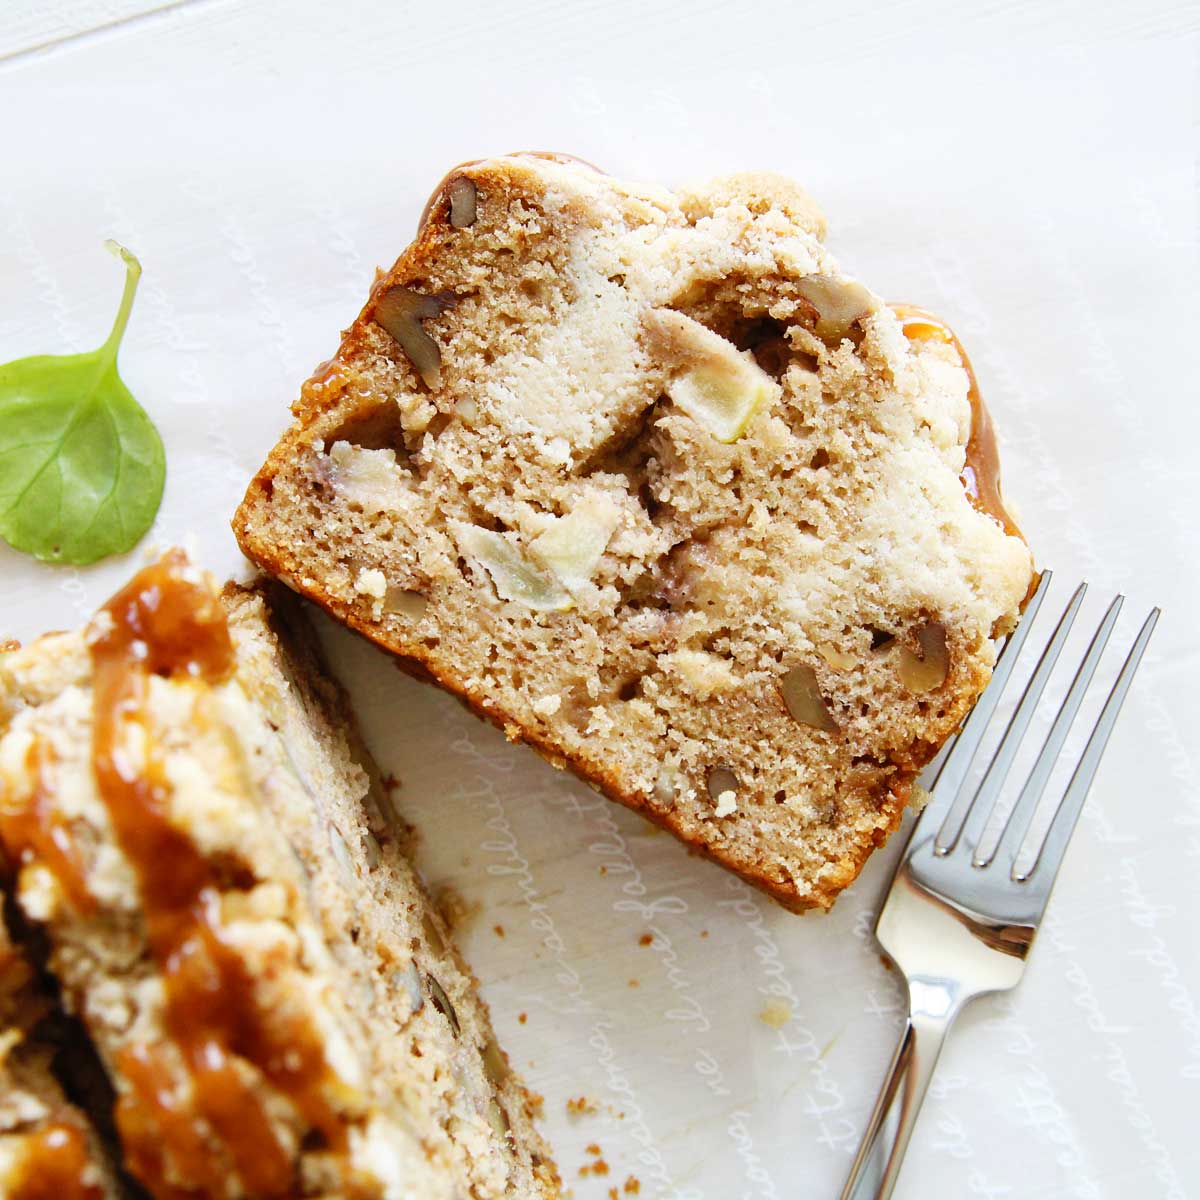 The Most Comforting Applesauce Banana Bread with Streusel Topping - Strawberry Whipped Cream